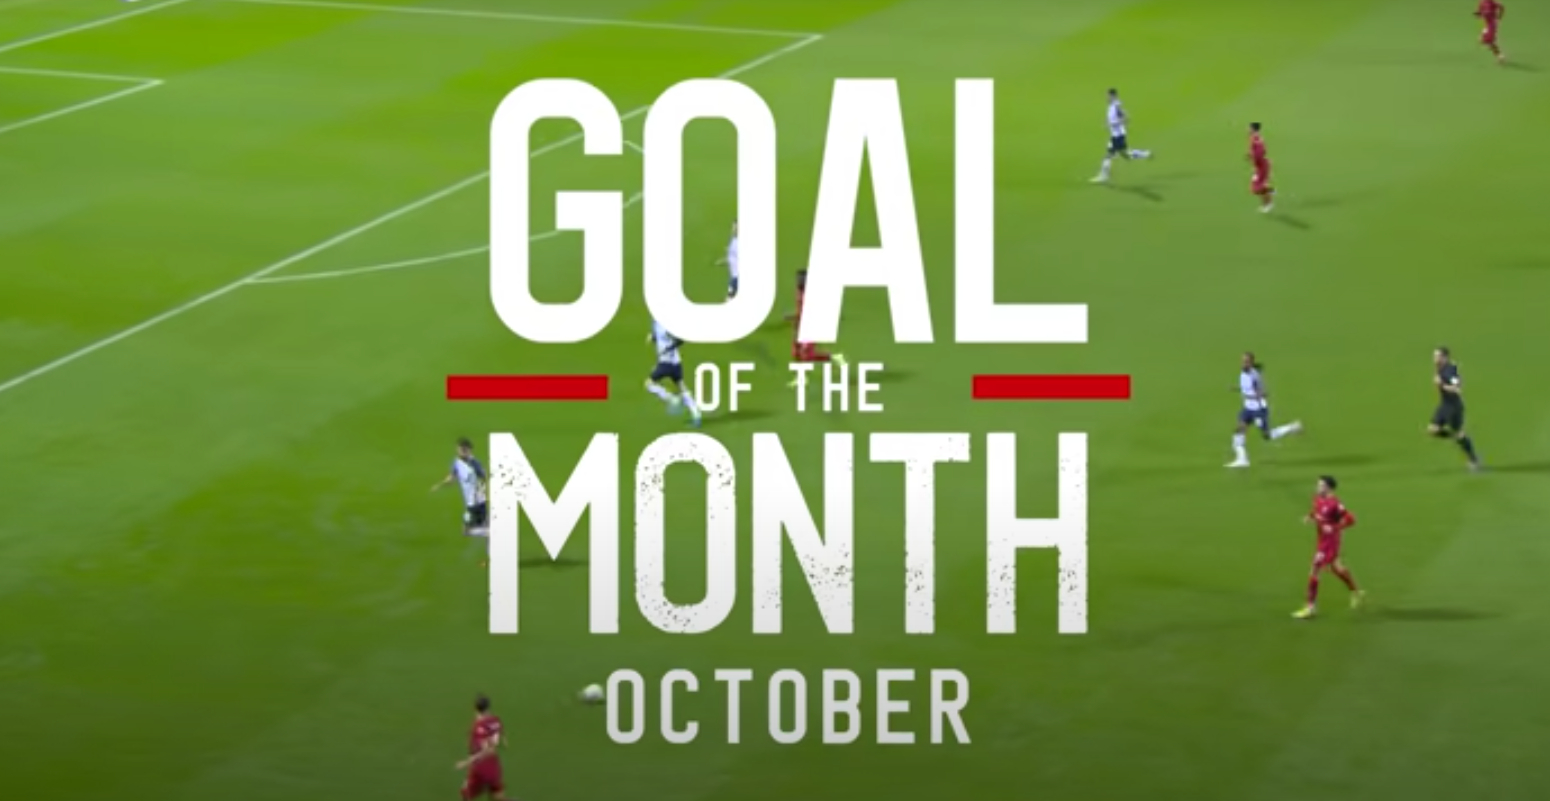 (Video) Liverpool’s goal of the month award winner decided for October following fan vote on club website